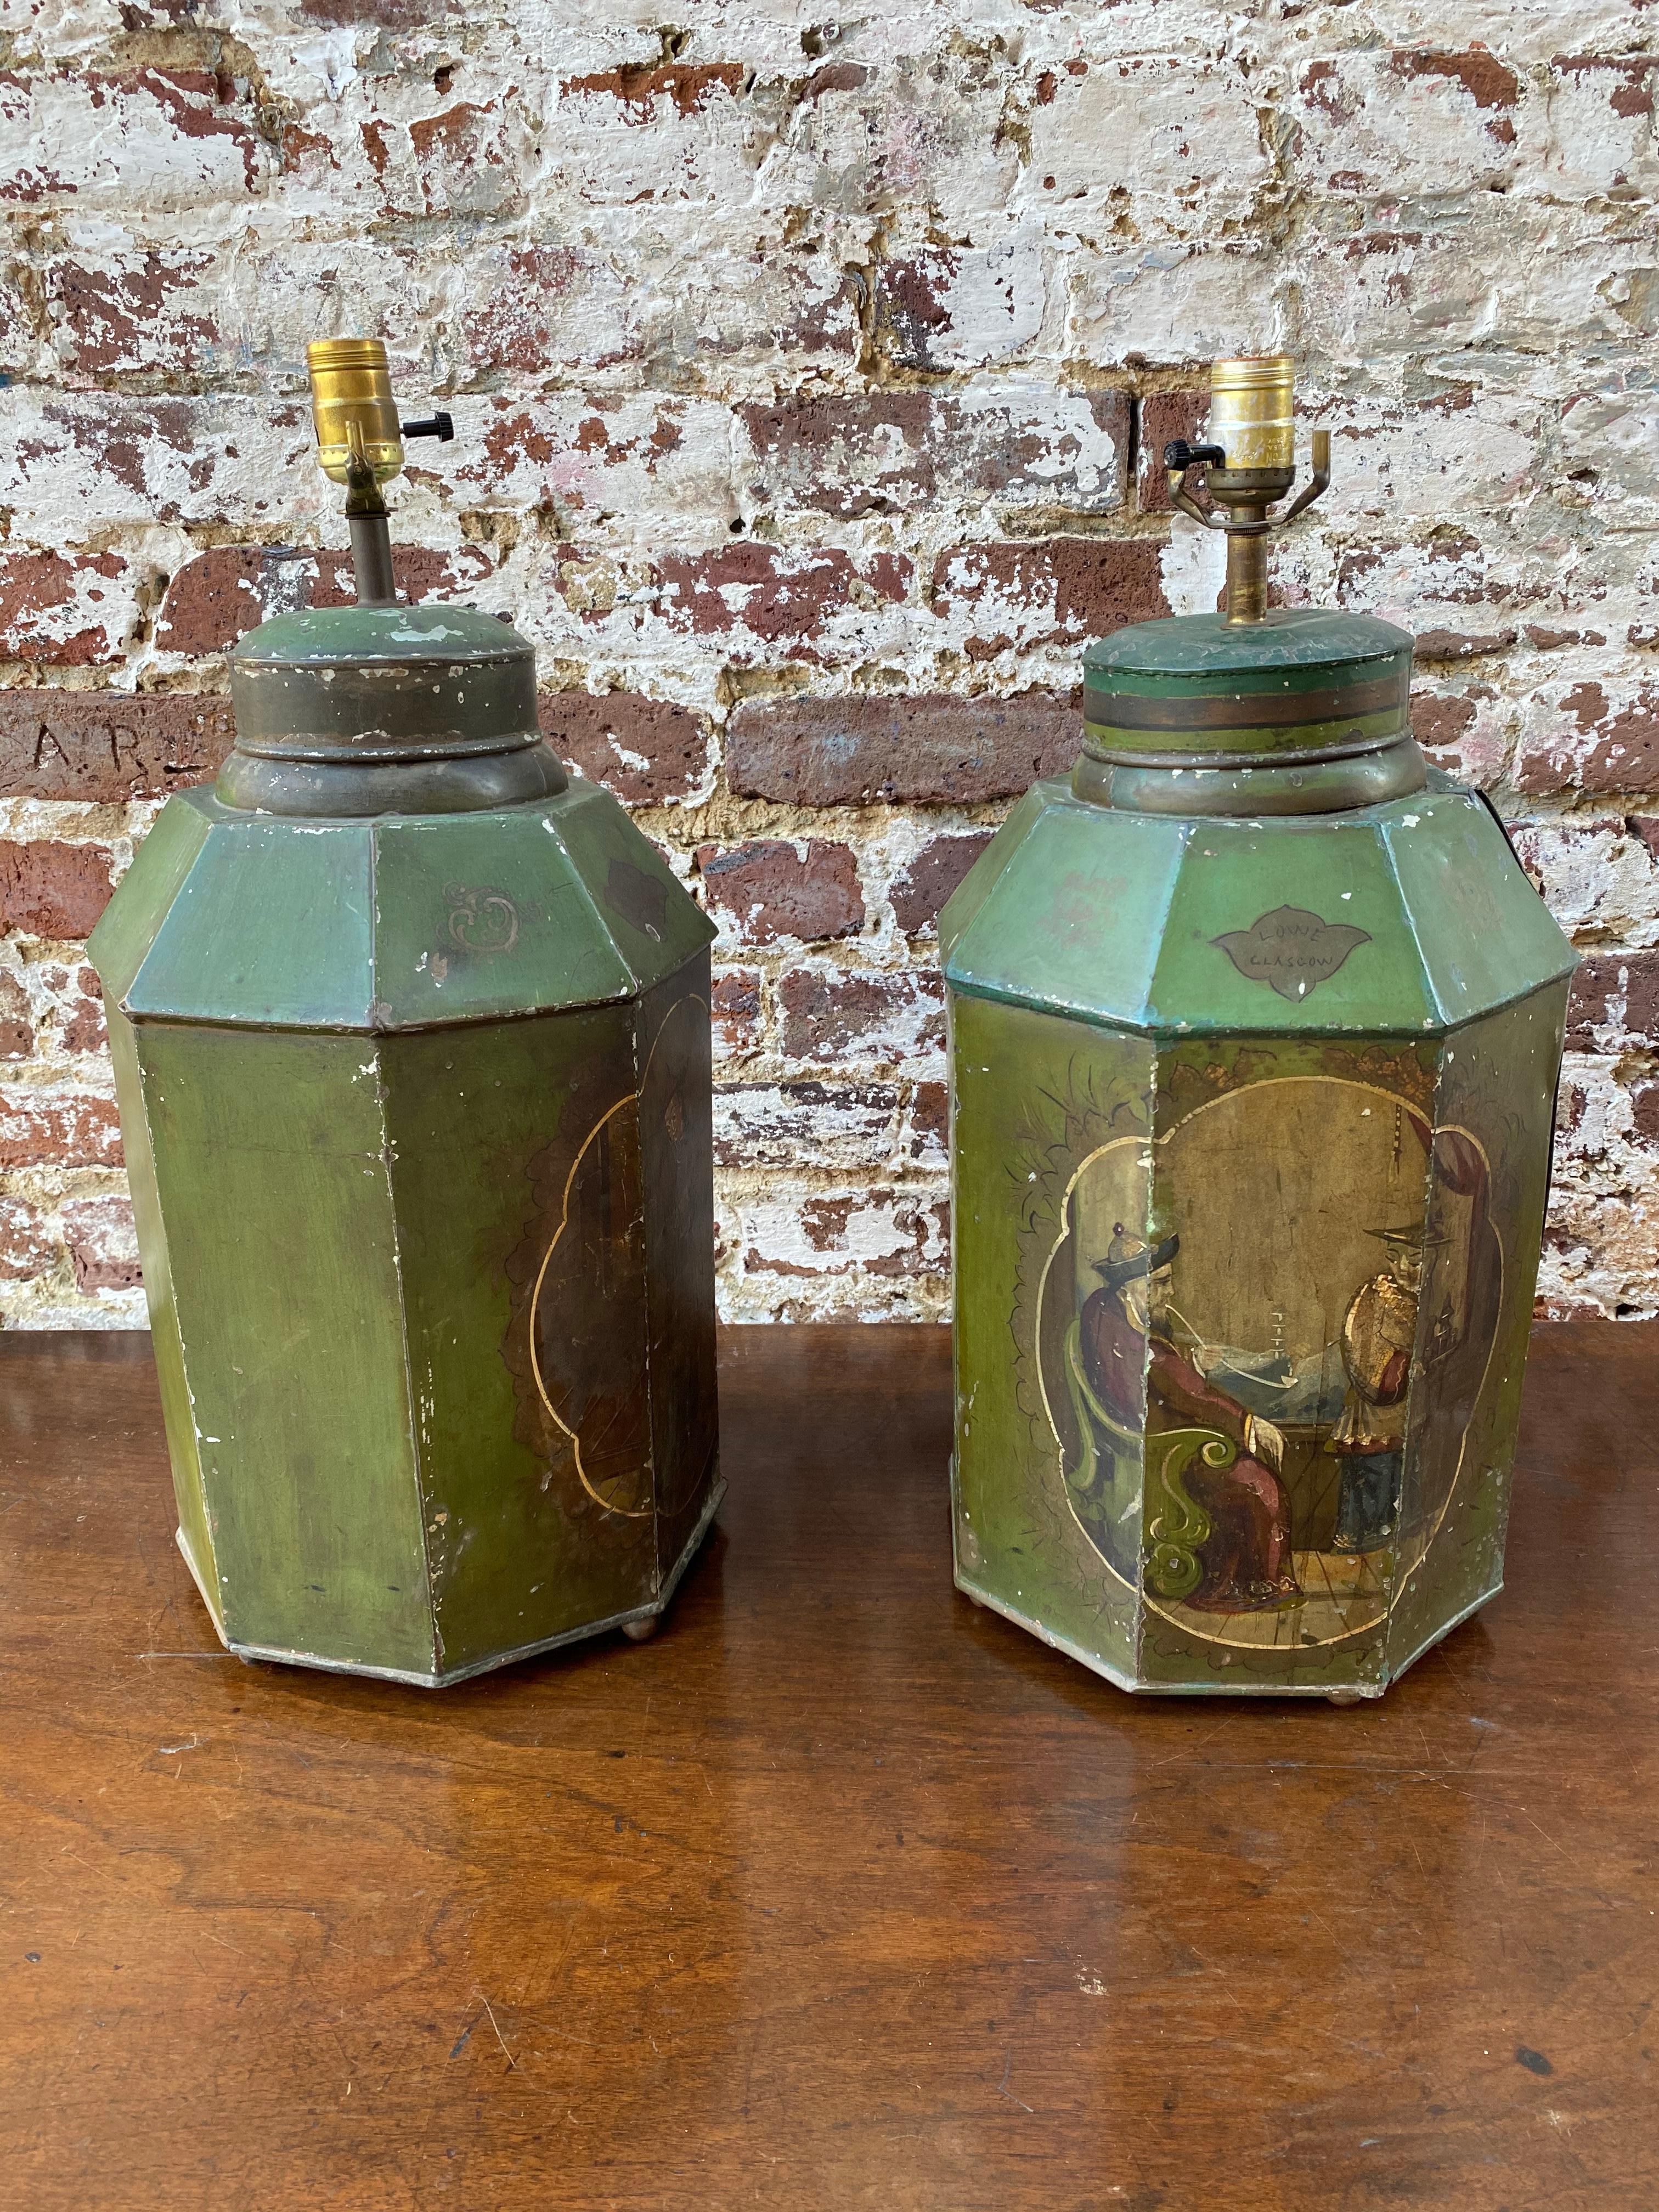 Tin Early 19th Century Tea Bins in Original Green Paint with Decorative Paint